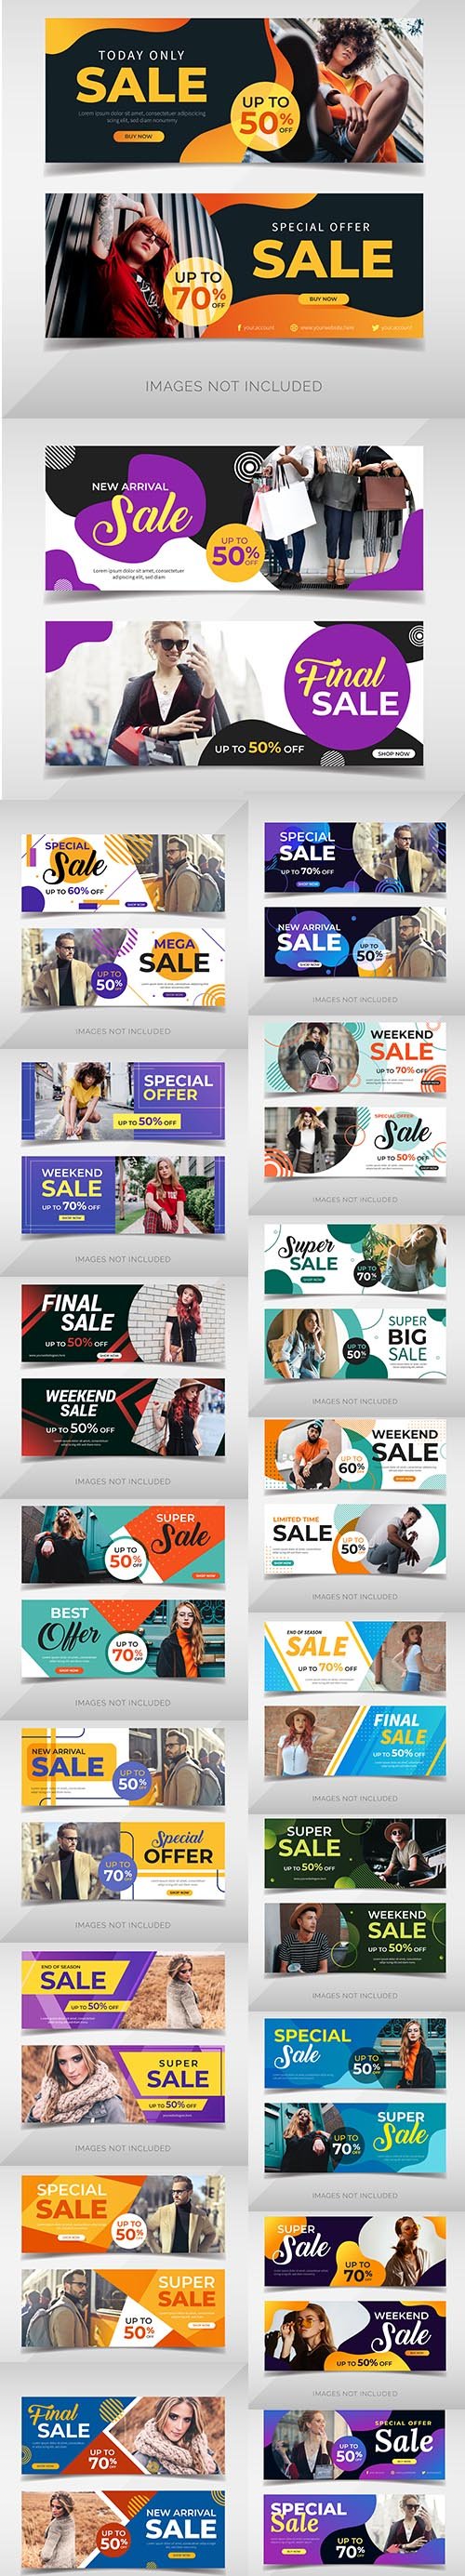 Fashion Sale Promotion Facebook Banners Pack 2